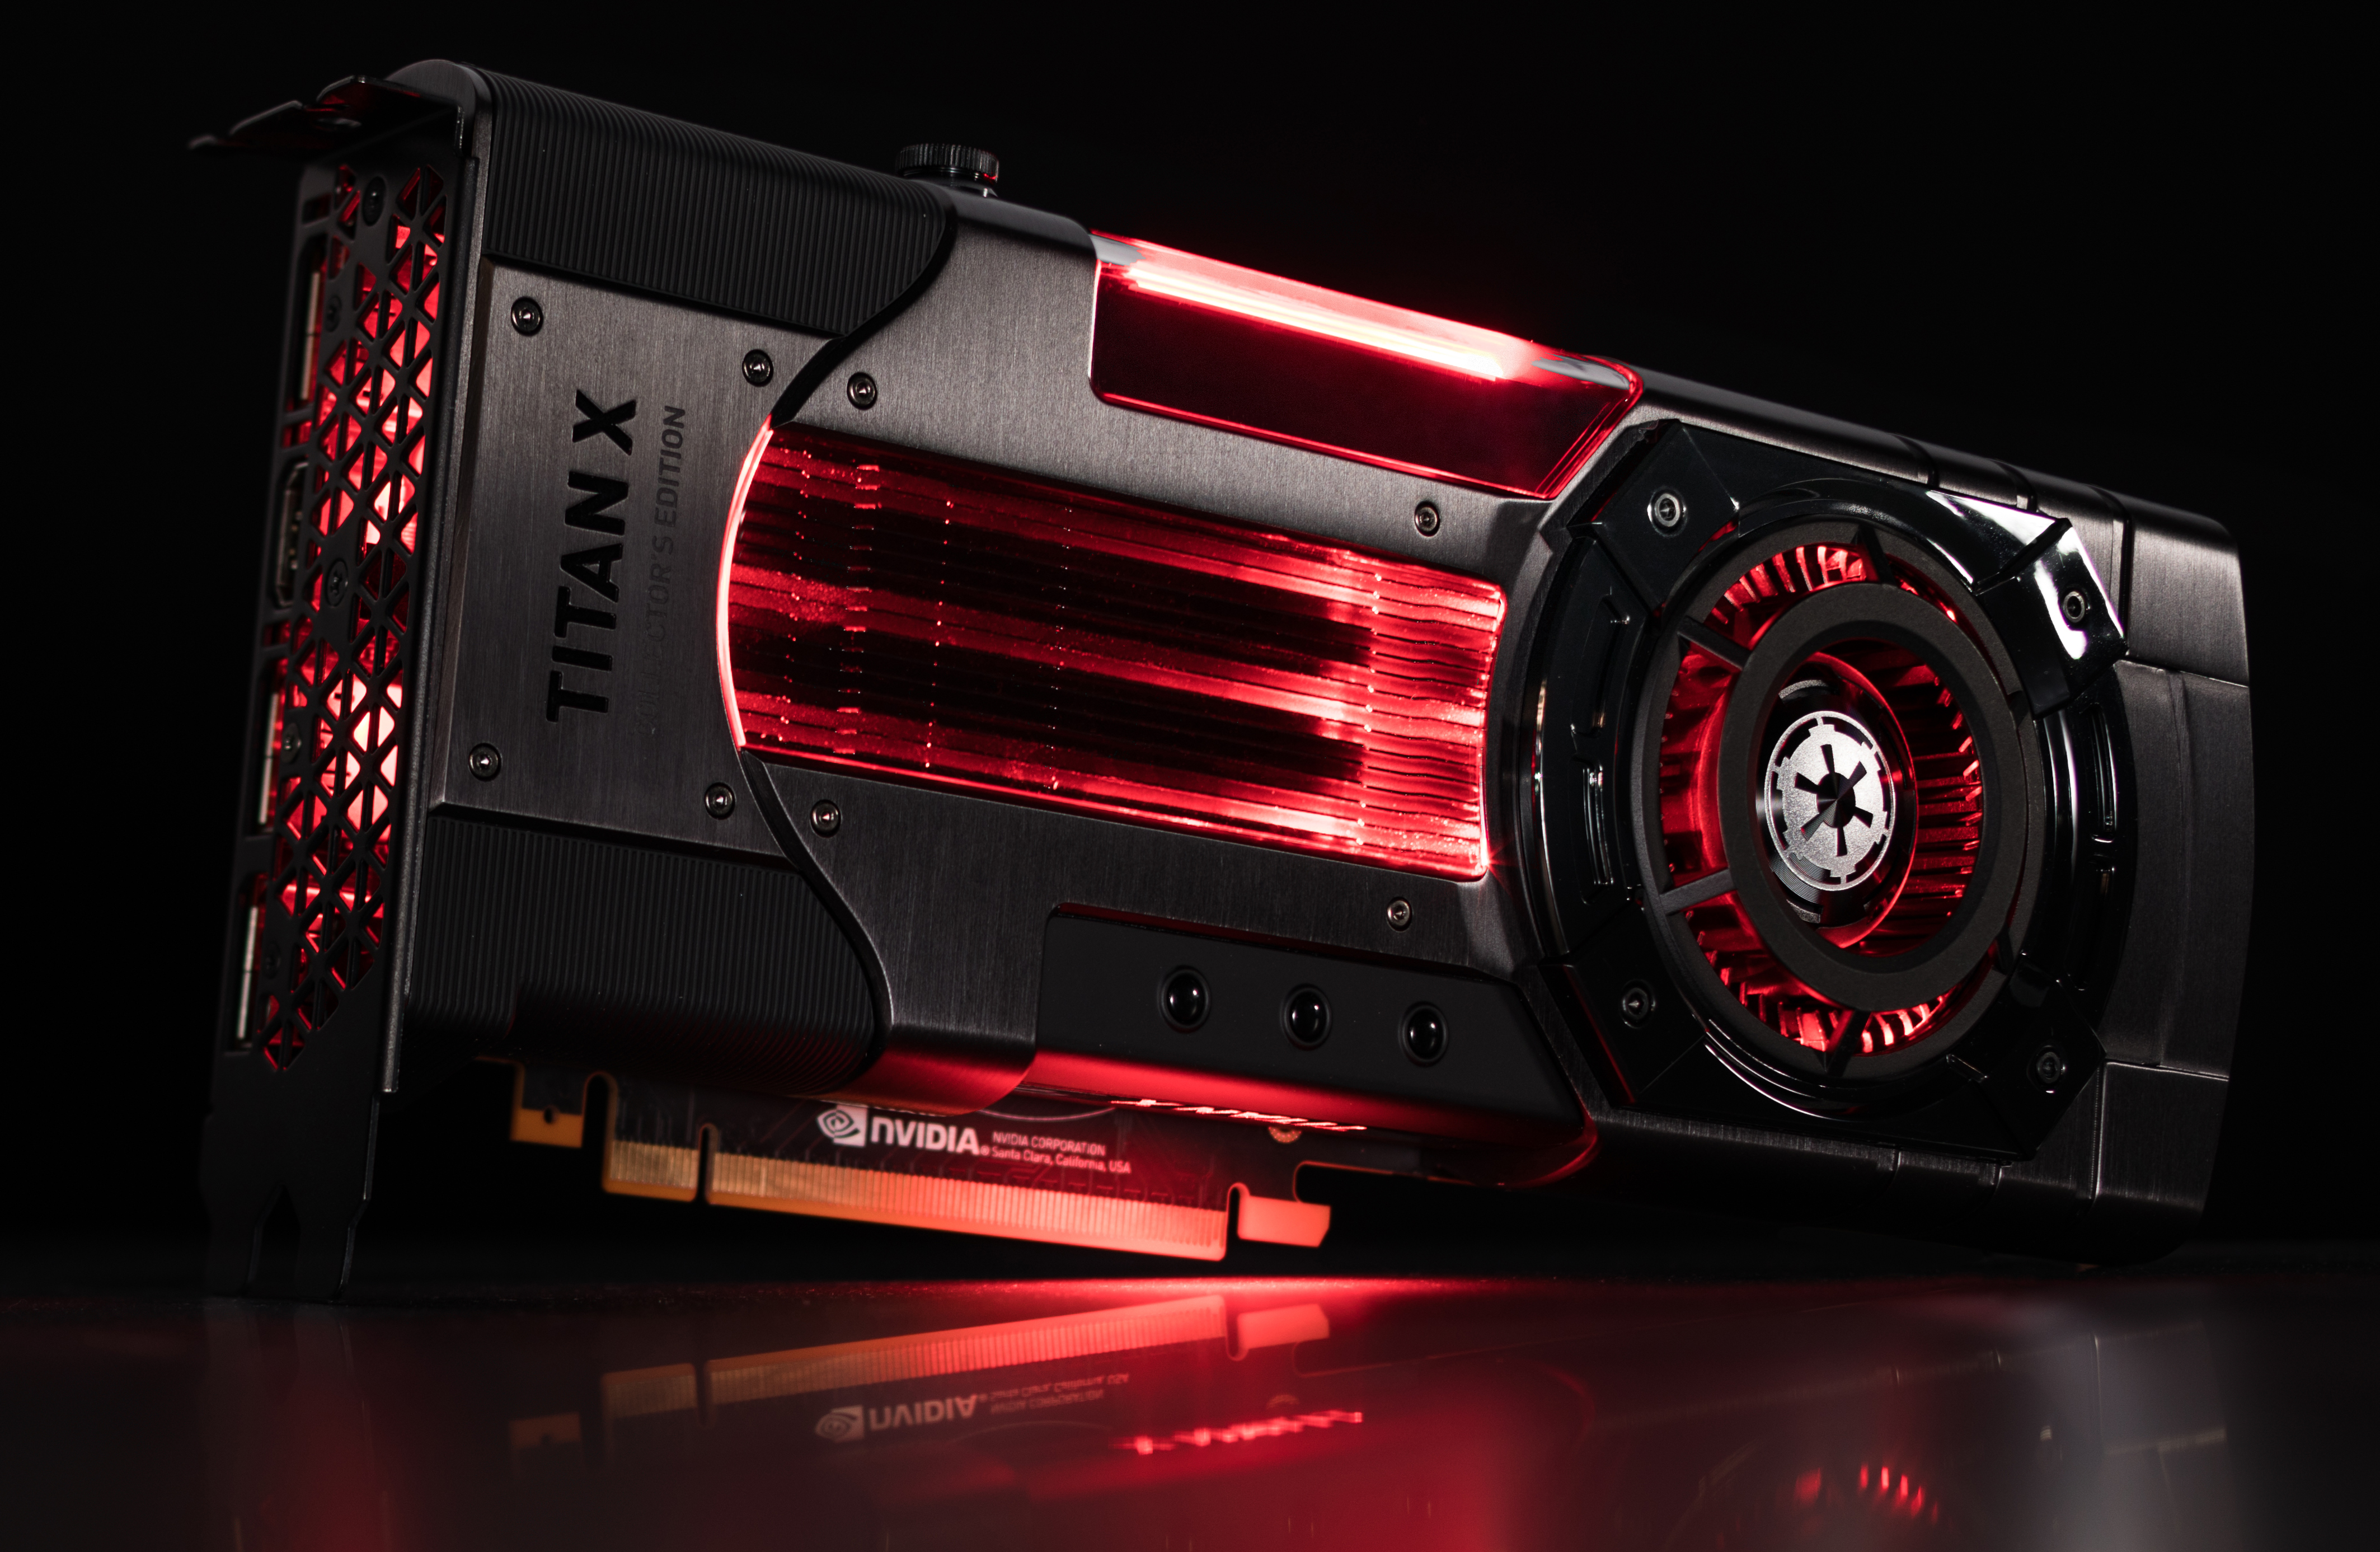 NVIDIA Launches Star Wars Themed Titan Xp Collector's Edition